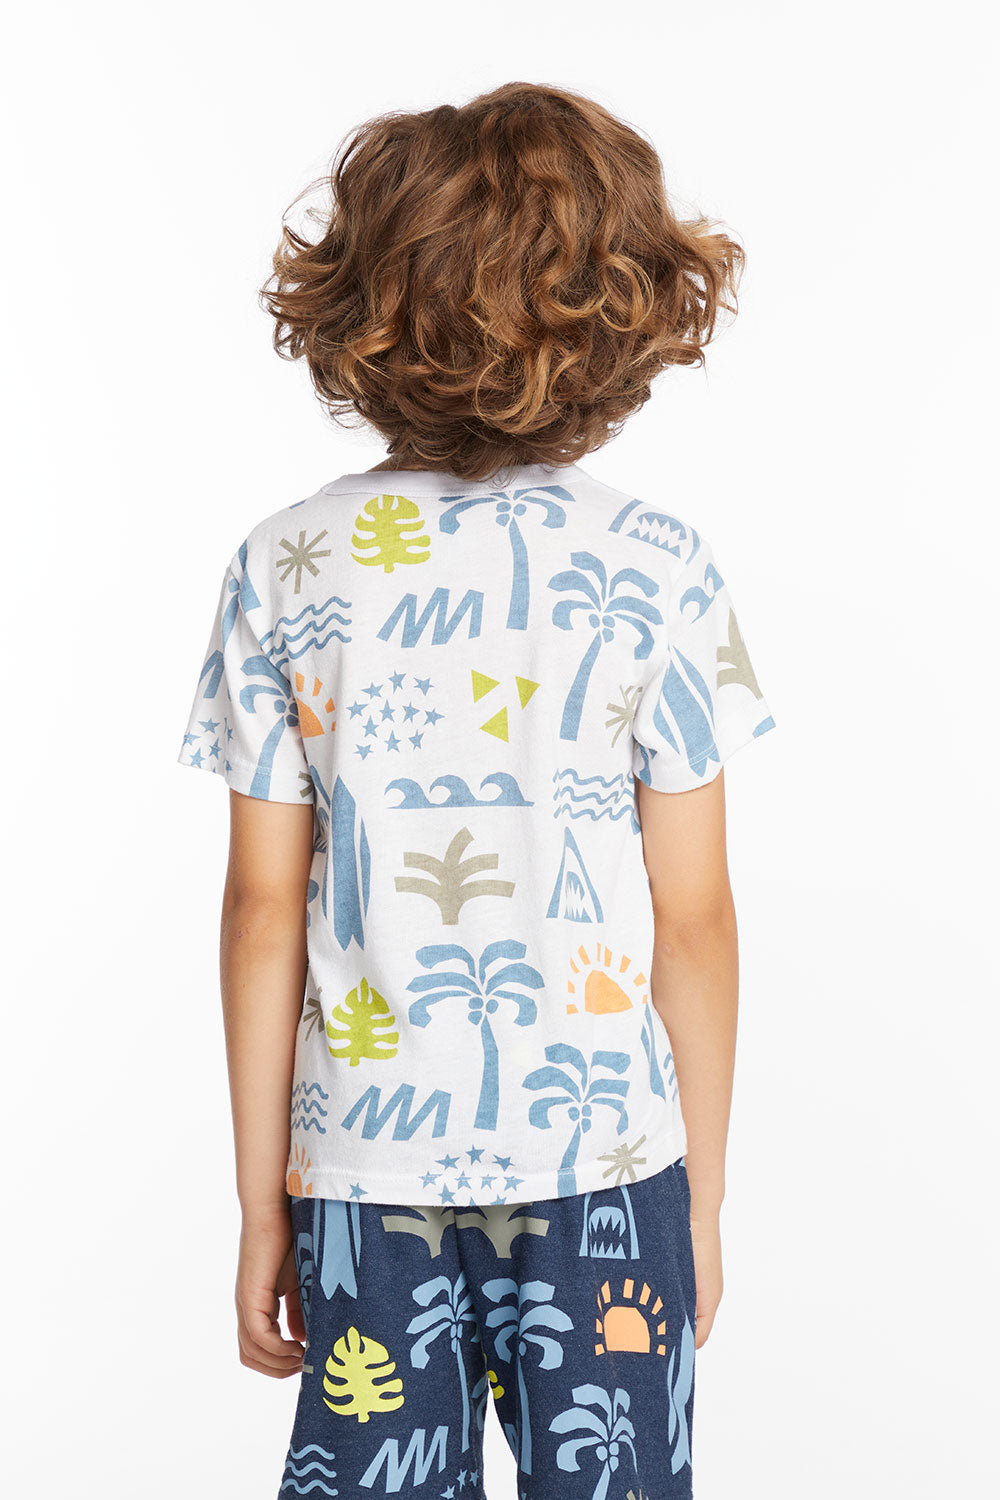 Surf's Up Boys Tee BOYS chaserbrand